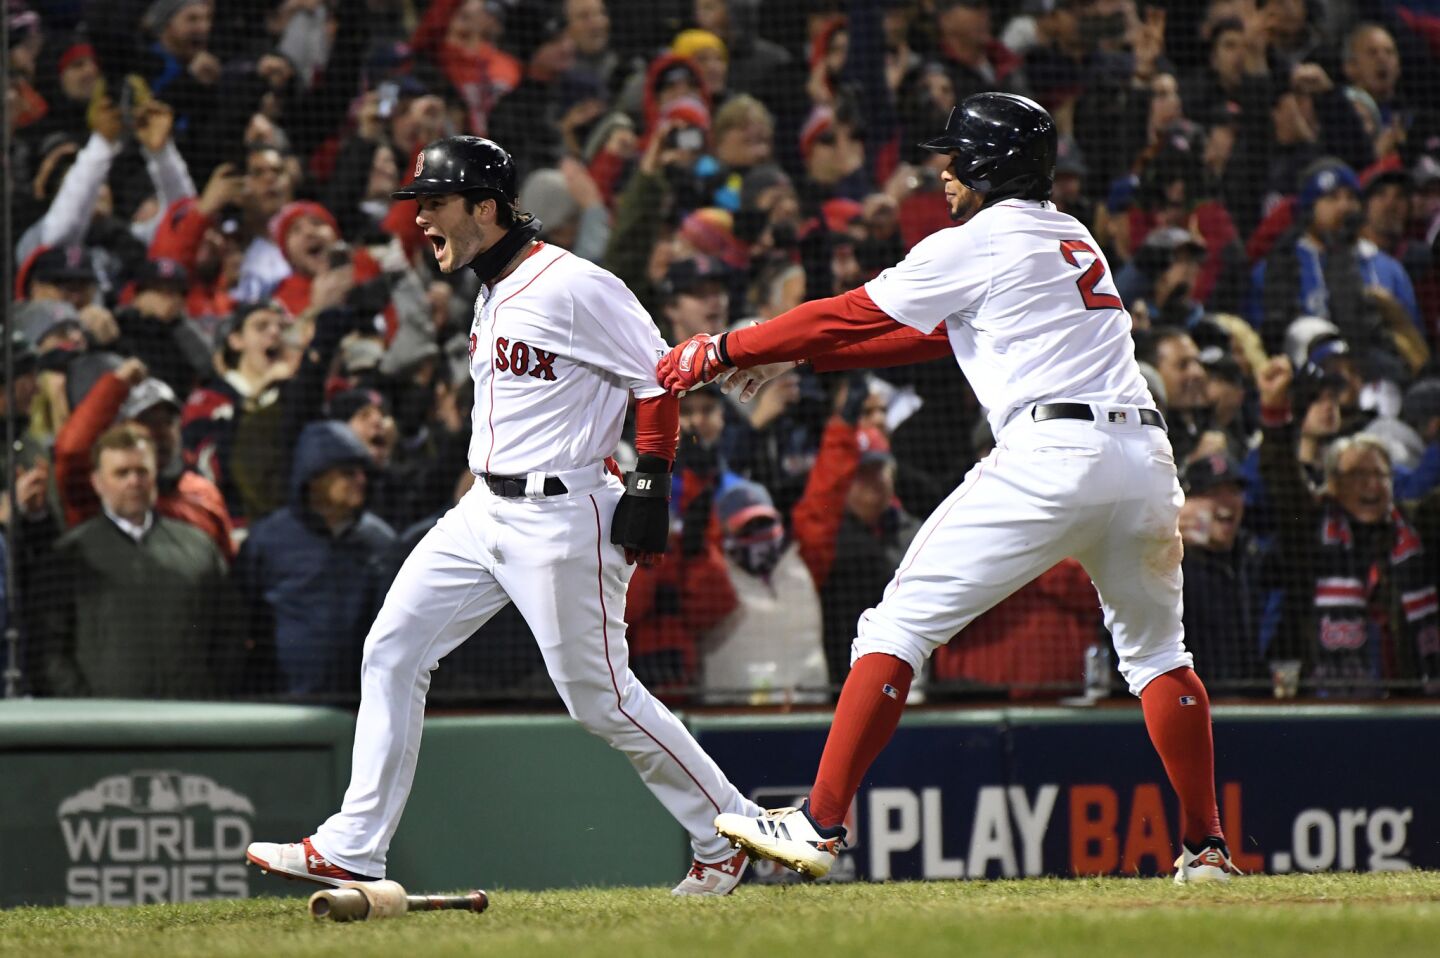 Red Sox Andrew Benintendi and Xander Bogaerts celebrate after Benintendi scored on a J.D. Martinez single in the fifth inning.